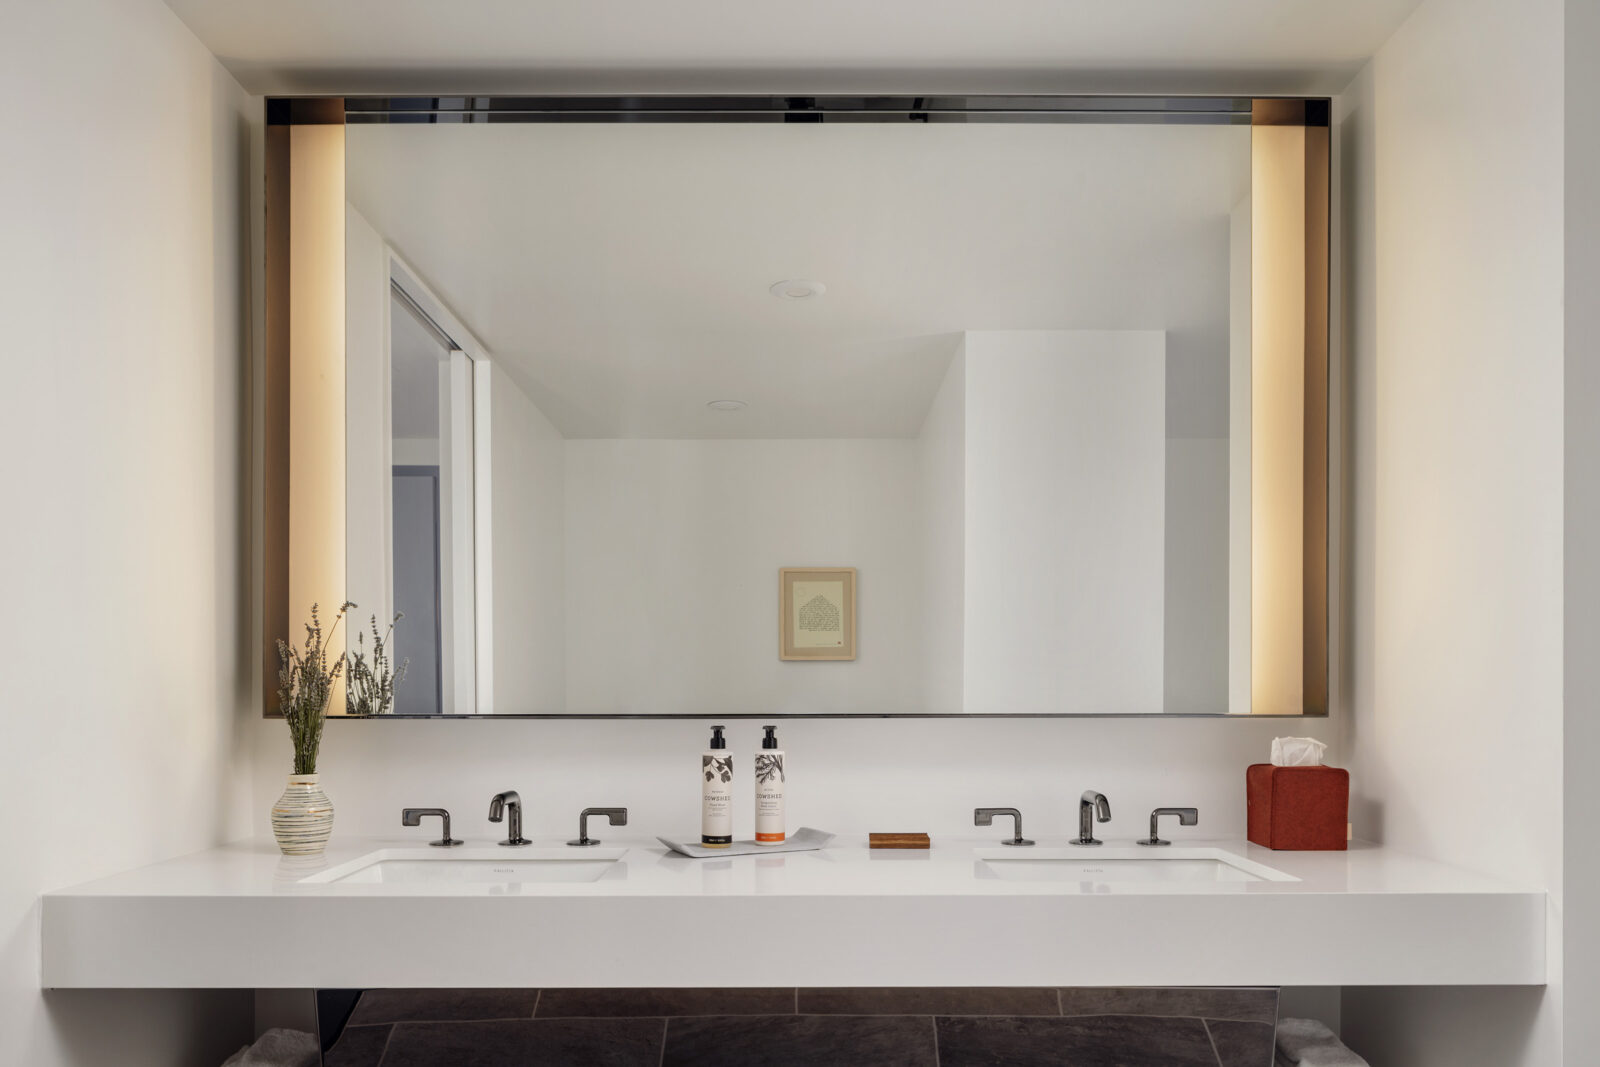 The bathroom has two washbasin sinks with a large wall-fitted mirror just above them.